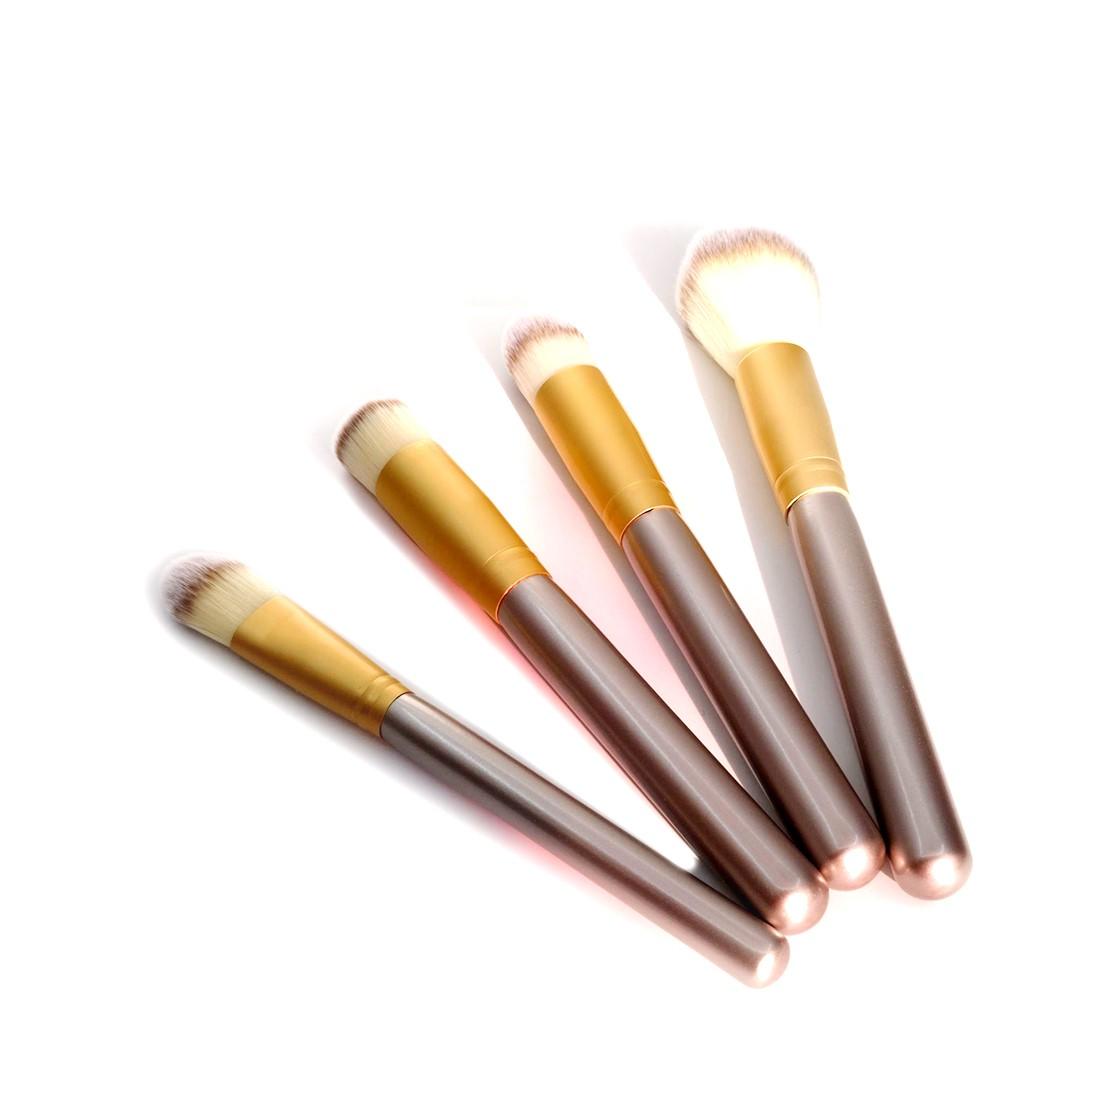 Suprabeauty low-cost eye brushes best supplier for sale